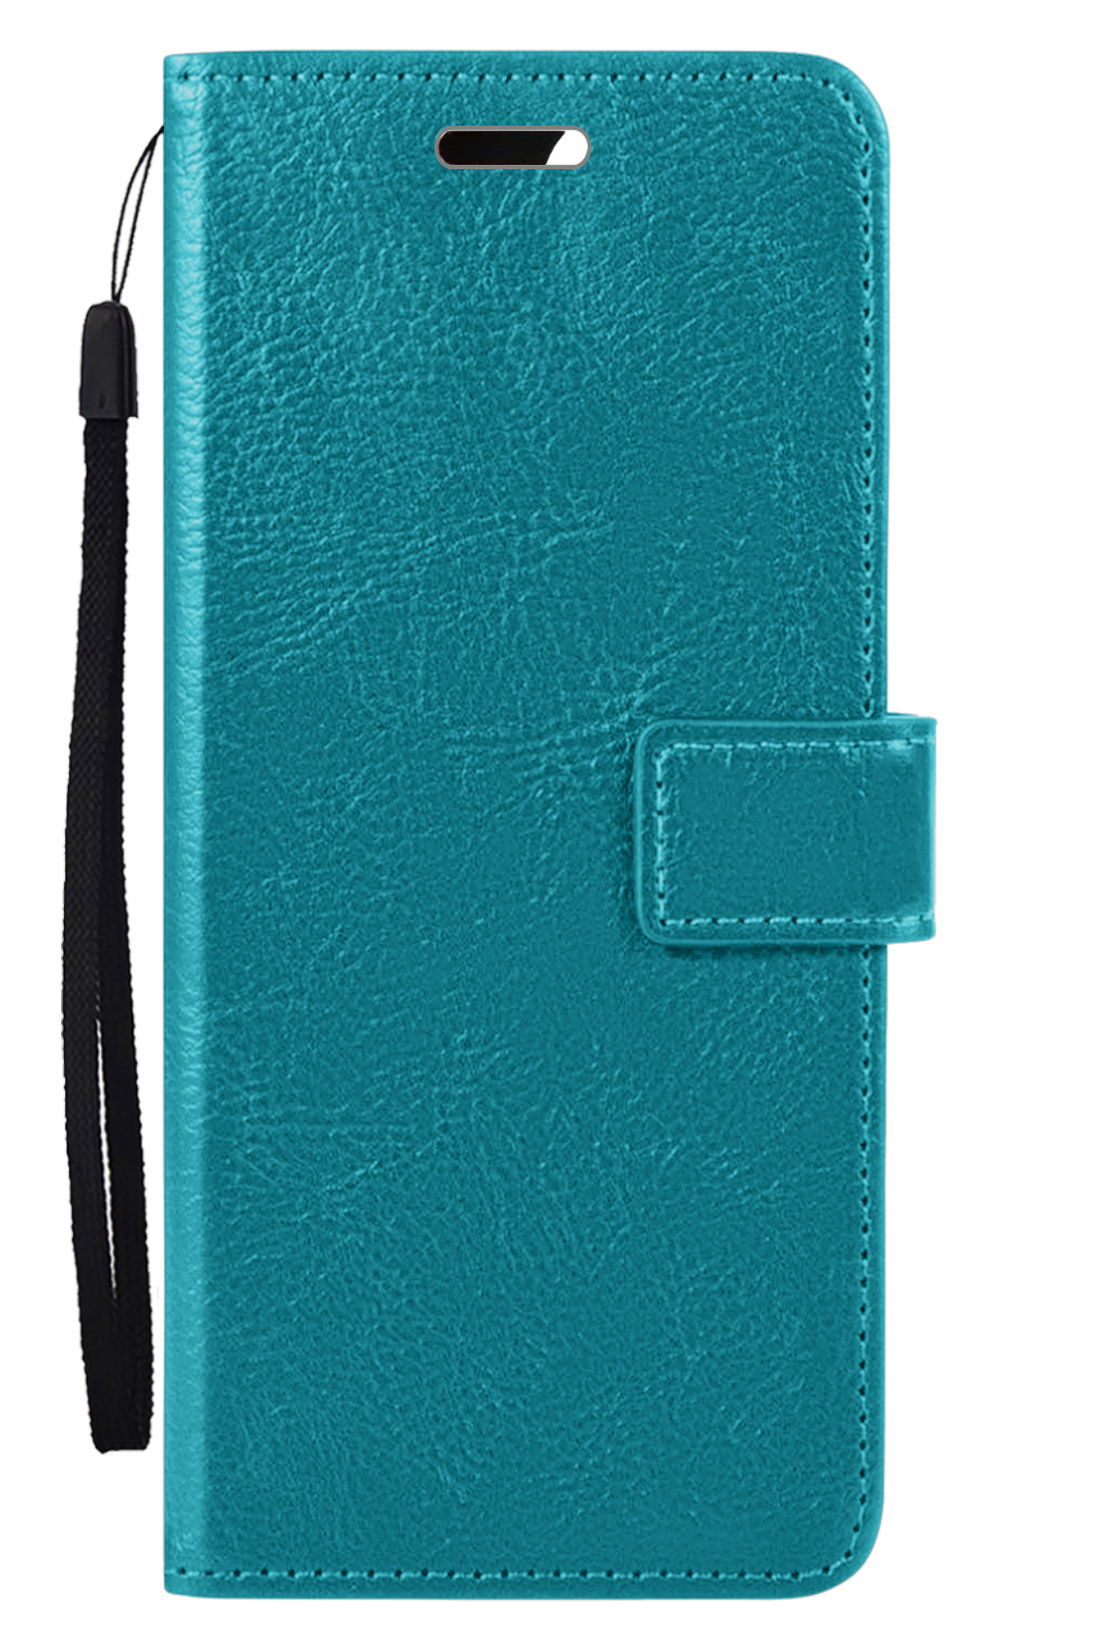 Nomfy Samsung Galaxy A03s Hoes Bookcase Turquoise - Flipcase Turquoise - Samsung Galaxy A03s Book Cover - Samsung Galaxy A03s Hoesje Turquoise